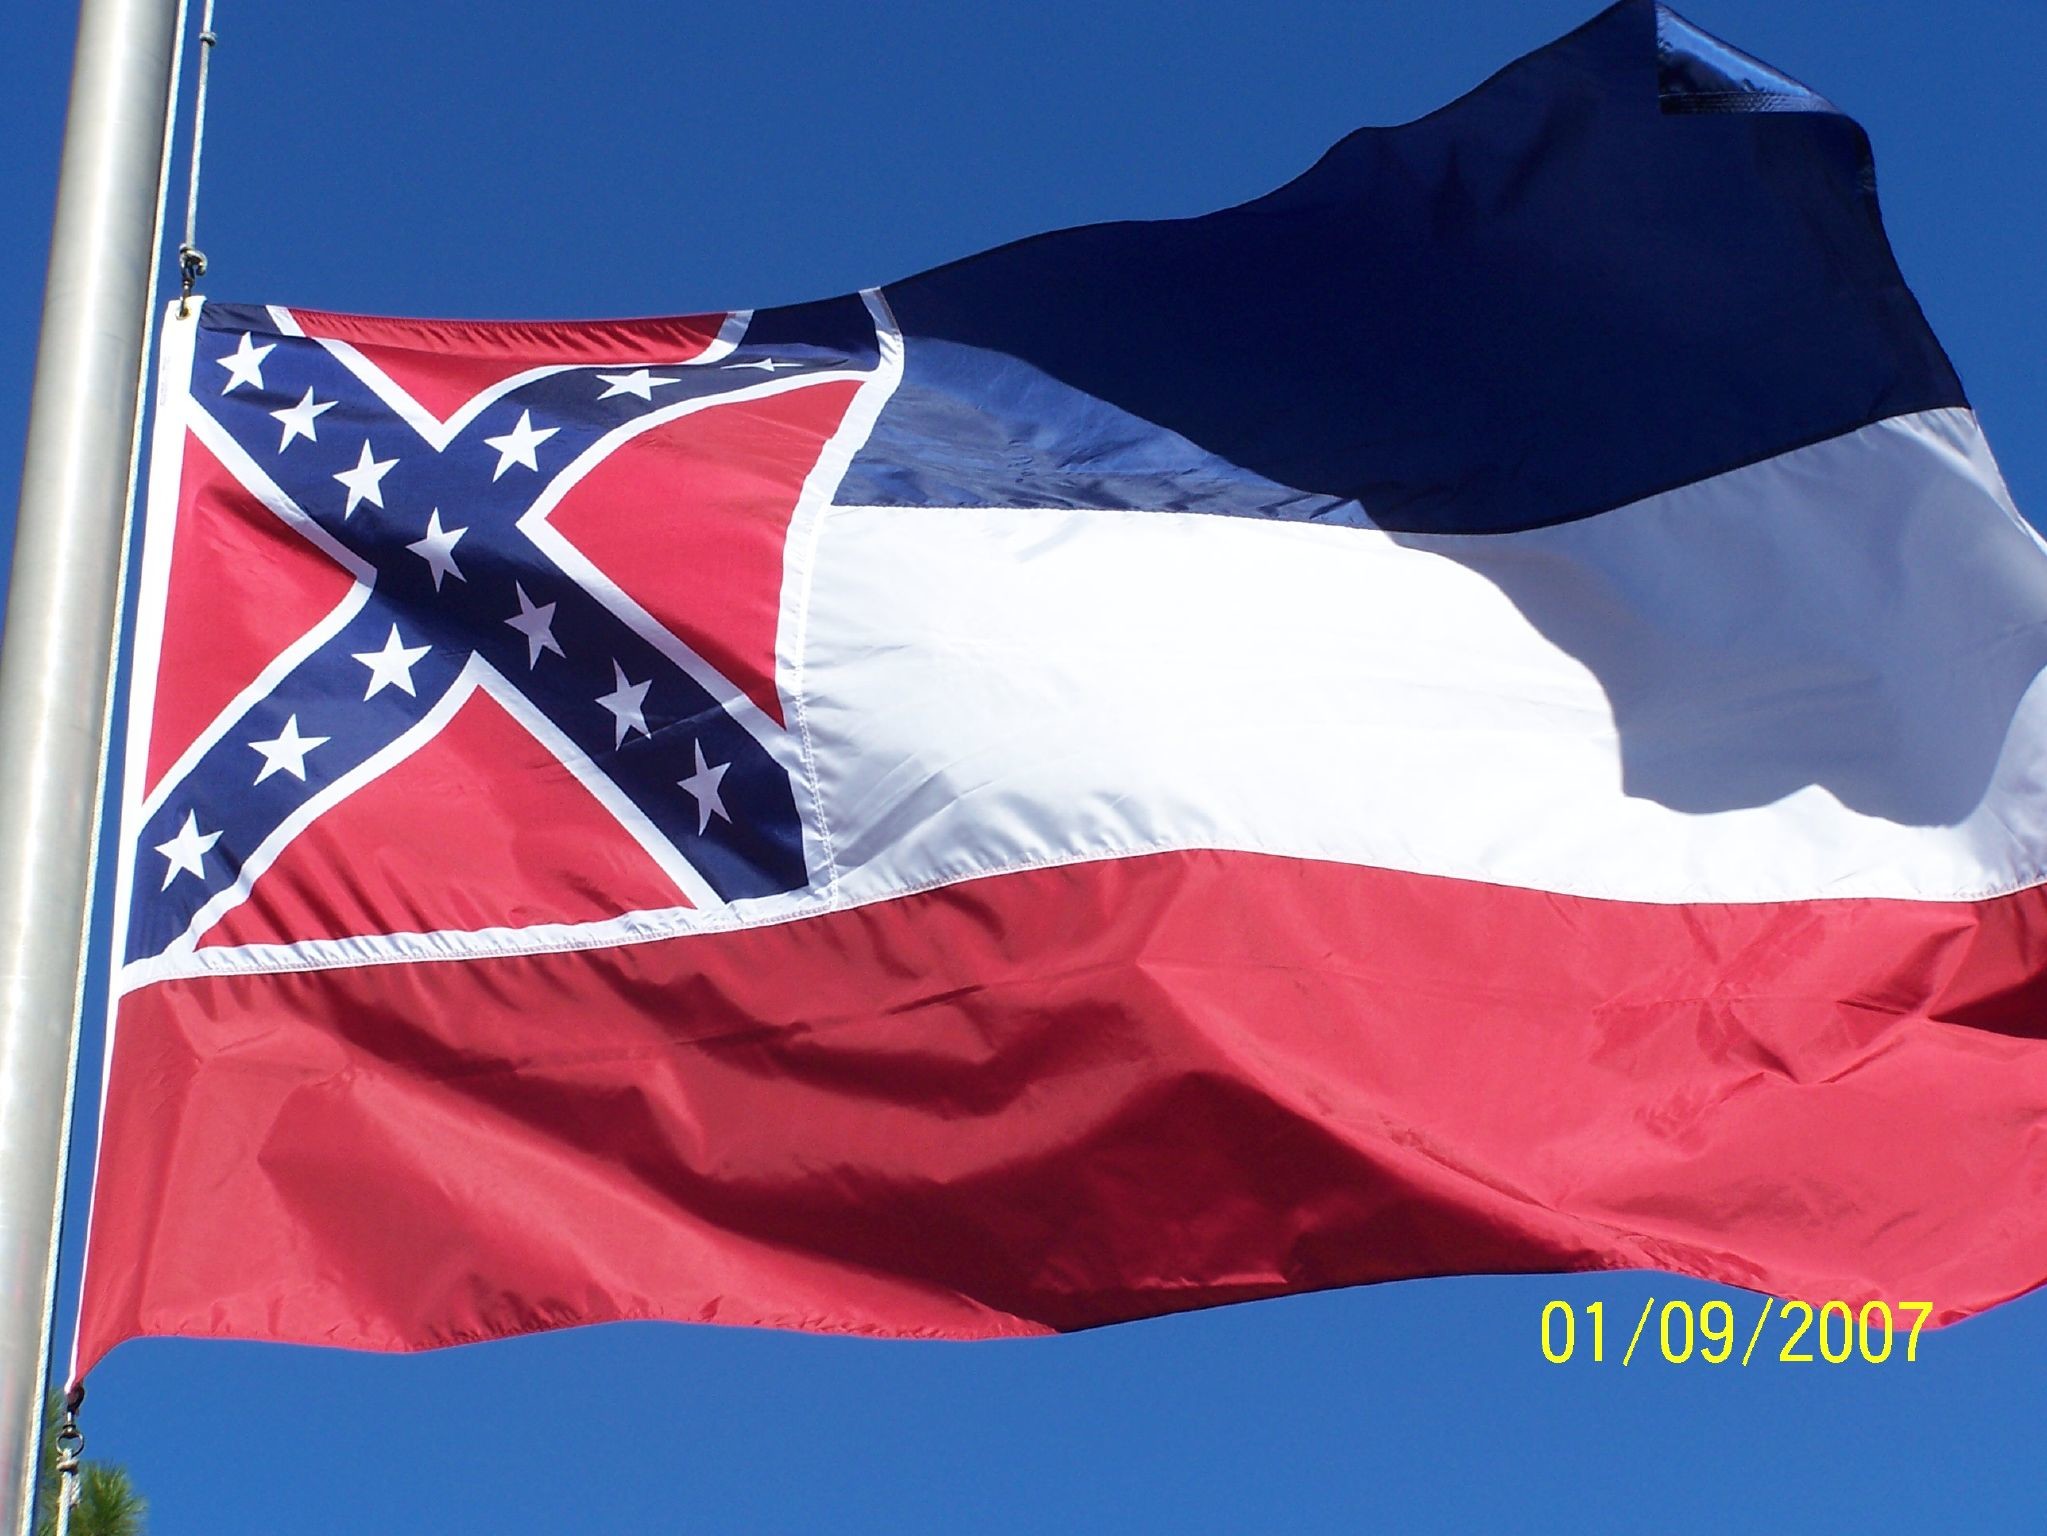 56 Confederate Flag Wallpaper for iPhone